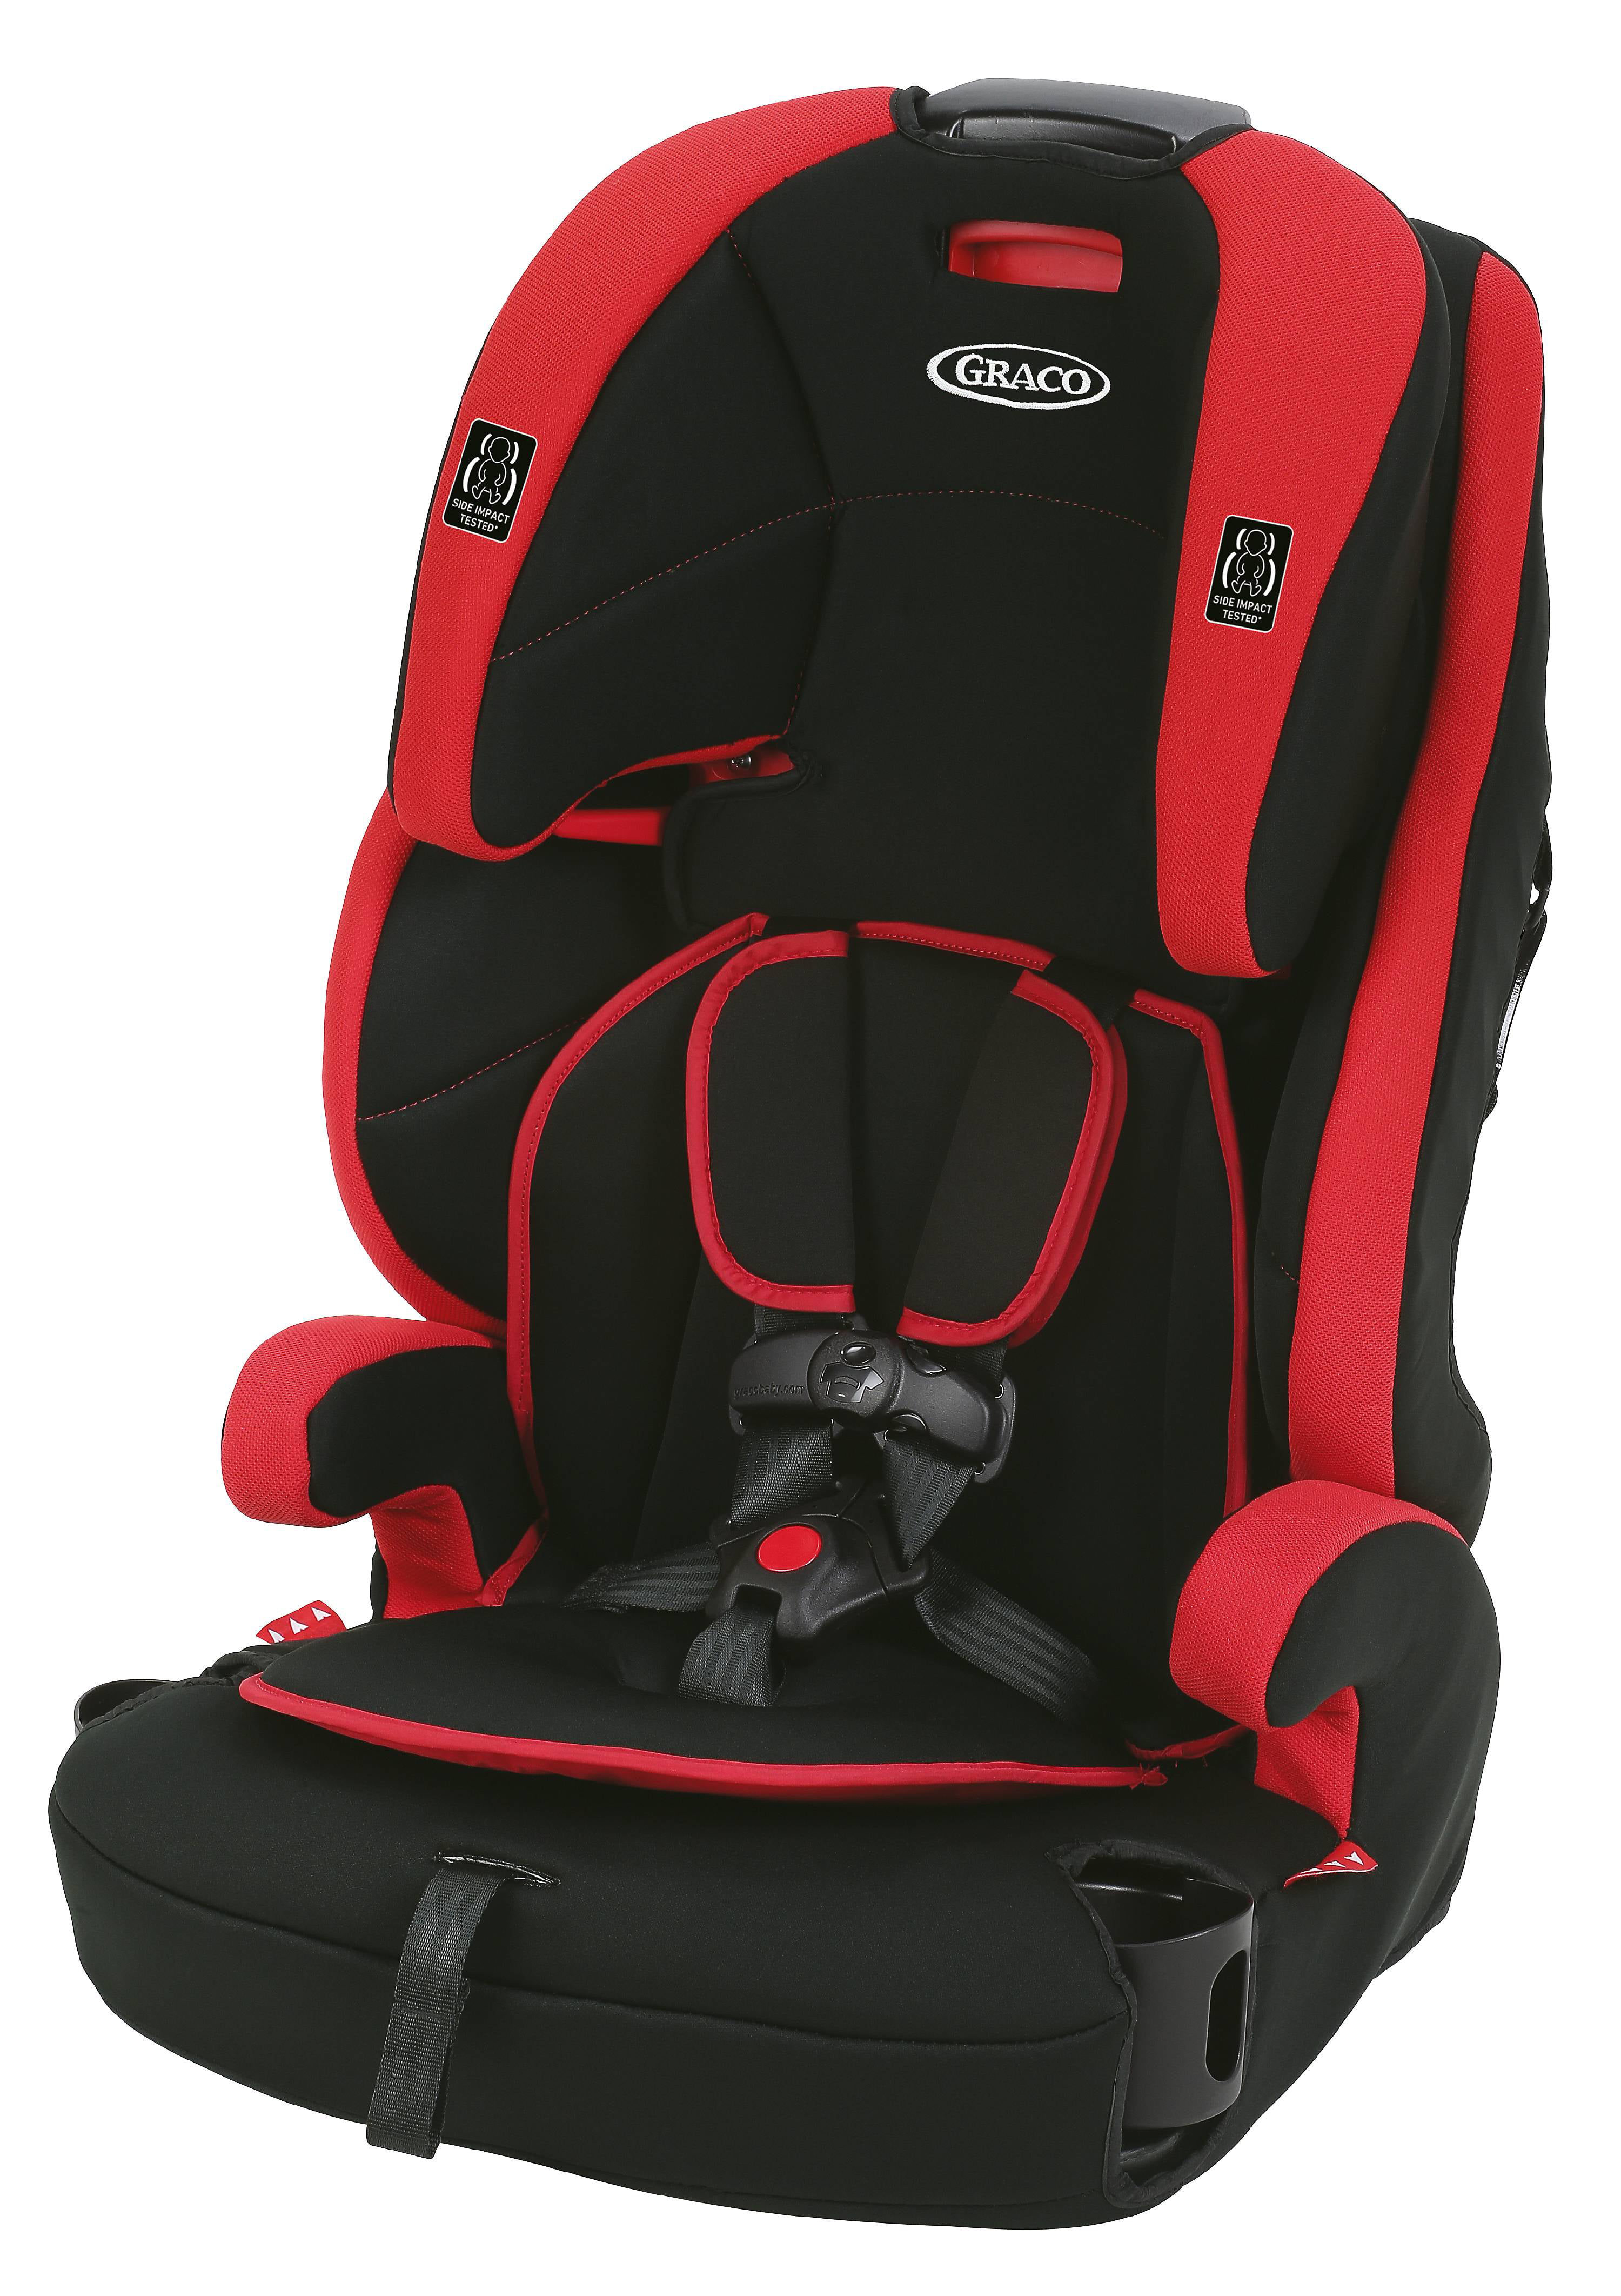 Alma Graco Highback TurboBooster Height Adjustable Car Seat for 30-100 Pounds 